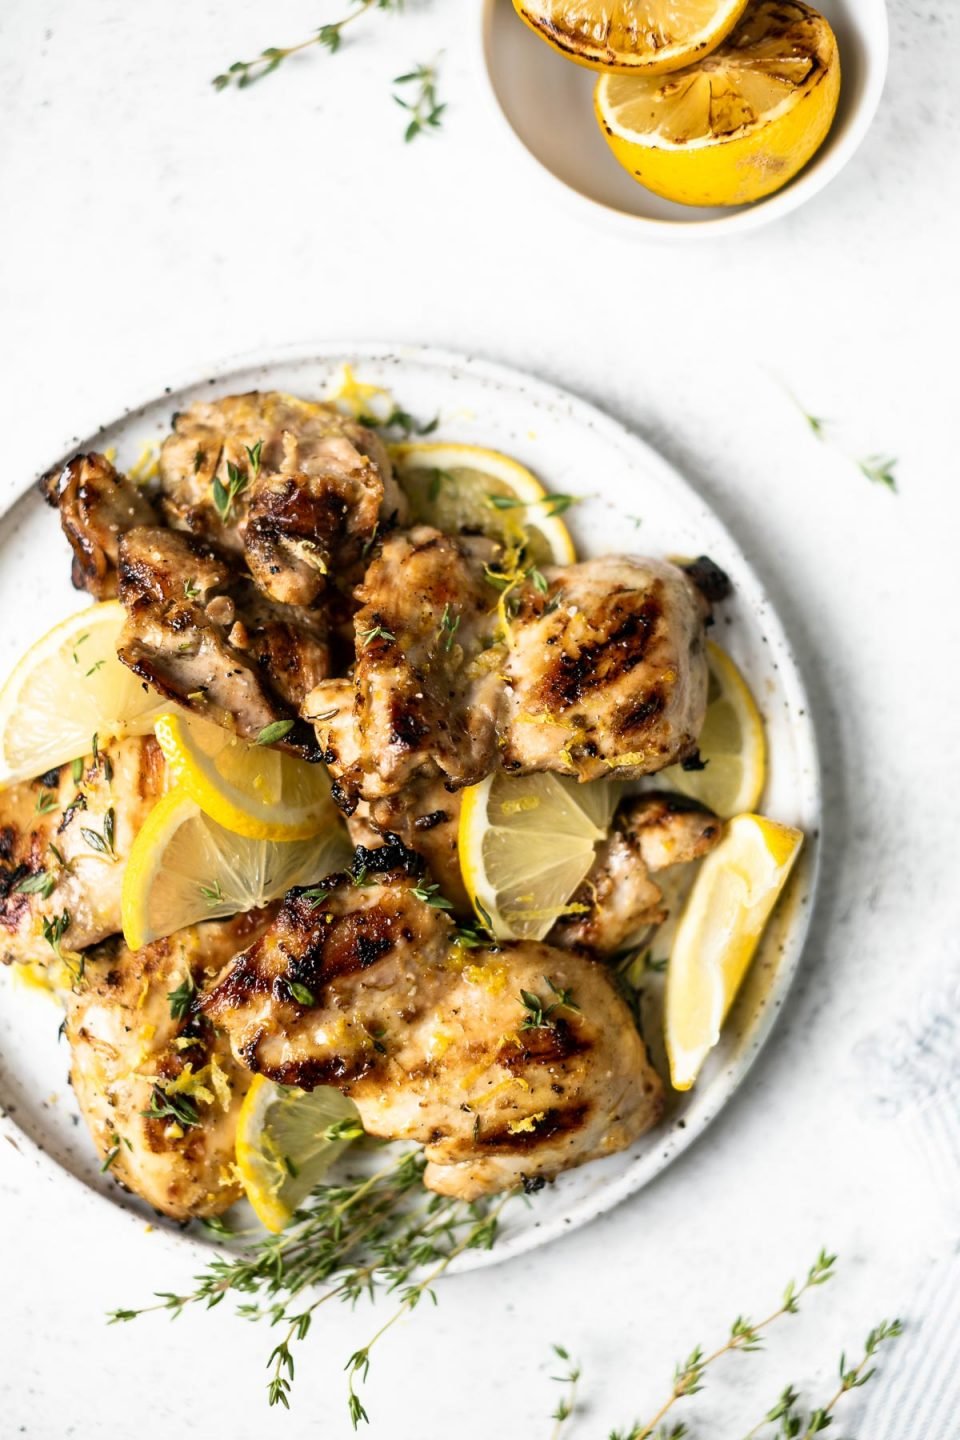 Grilled lemon chicken thighs arranged on a serving plate, with sliced lemon & sprigs of fresh thyme. The plate sits atop a white surface, next to a bowl of grilled lemon halves & some sprigs of fresh thyme.